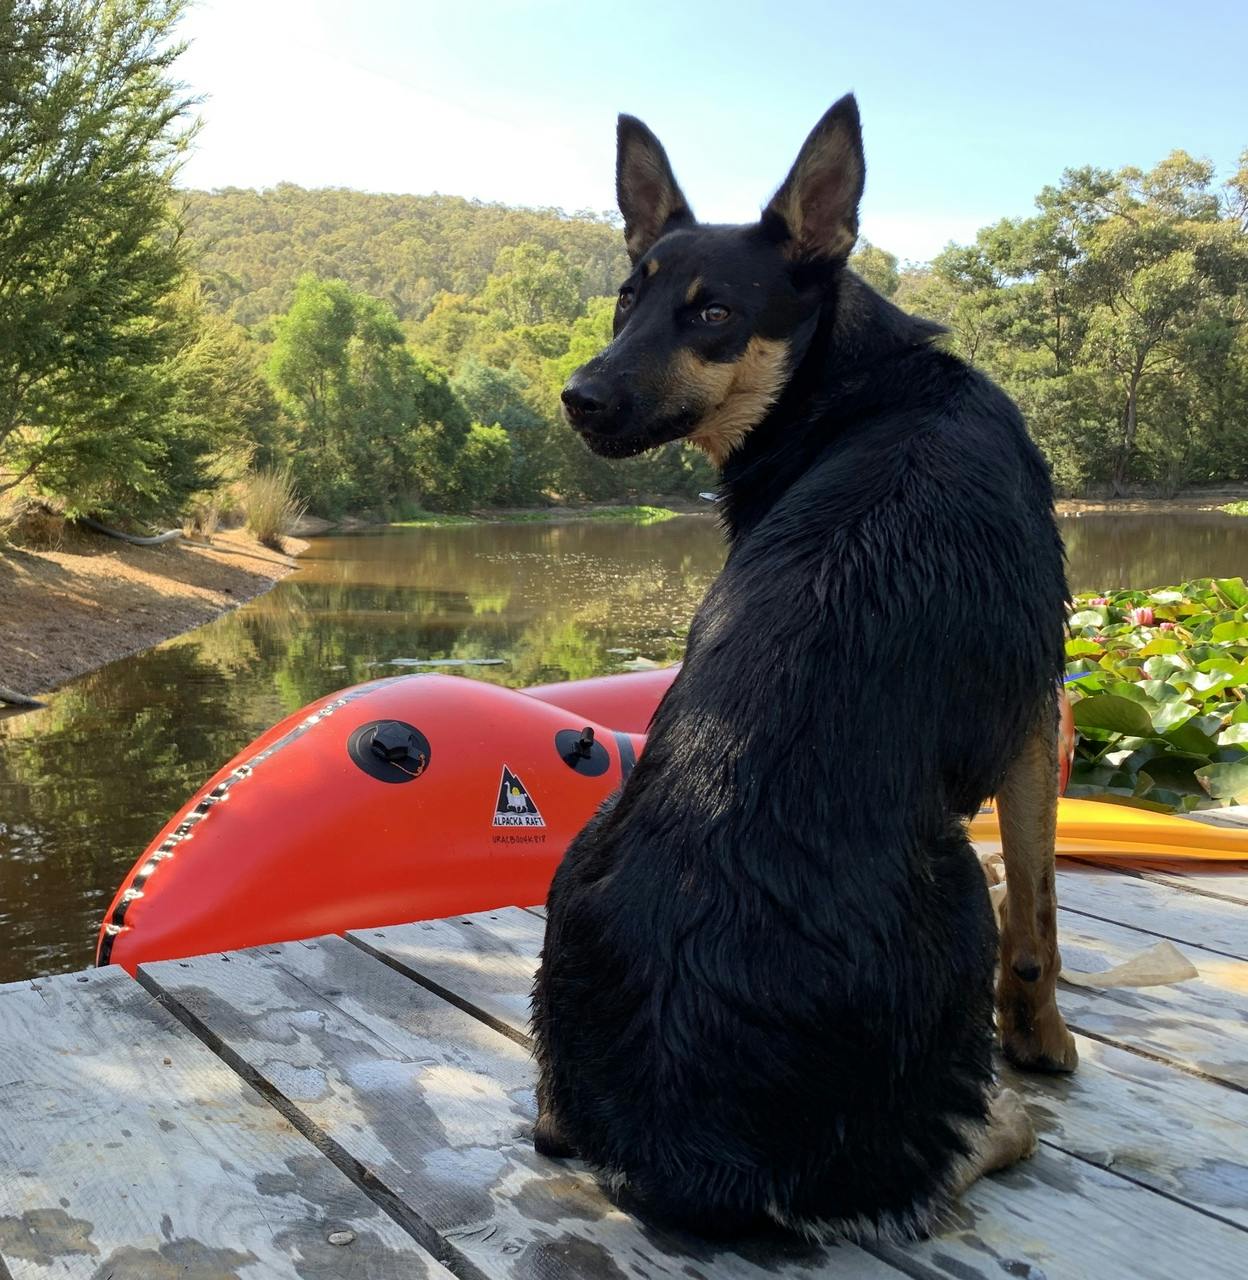 &#x201C;Herding the flock? When I overheard the hoomans talking about getting a couple of Alpackas I was super excited to put my herding skills into action. Wasn&#x2019;t expecting to have to learn new water skills instead. #kelpiesofpackrafting.&#x201D;